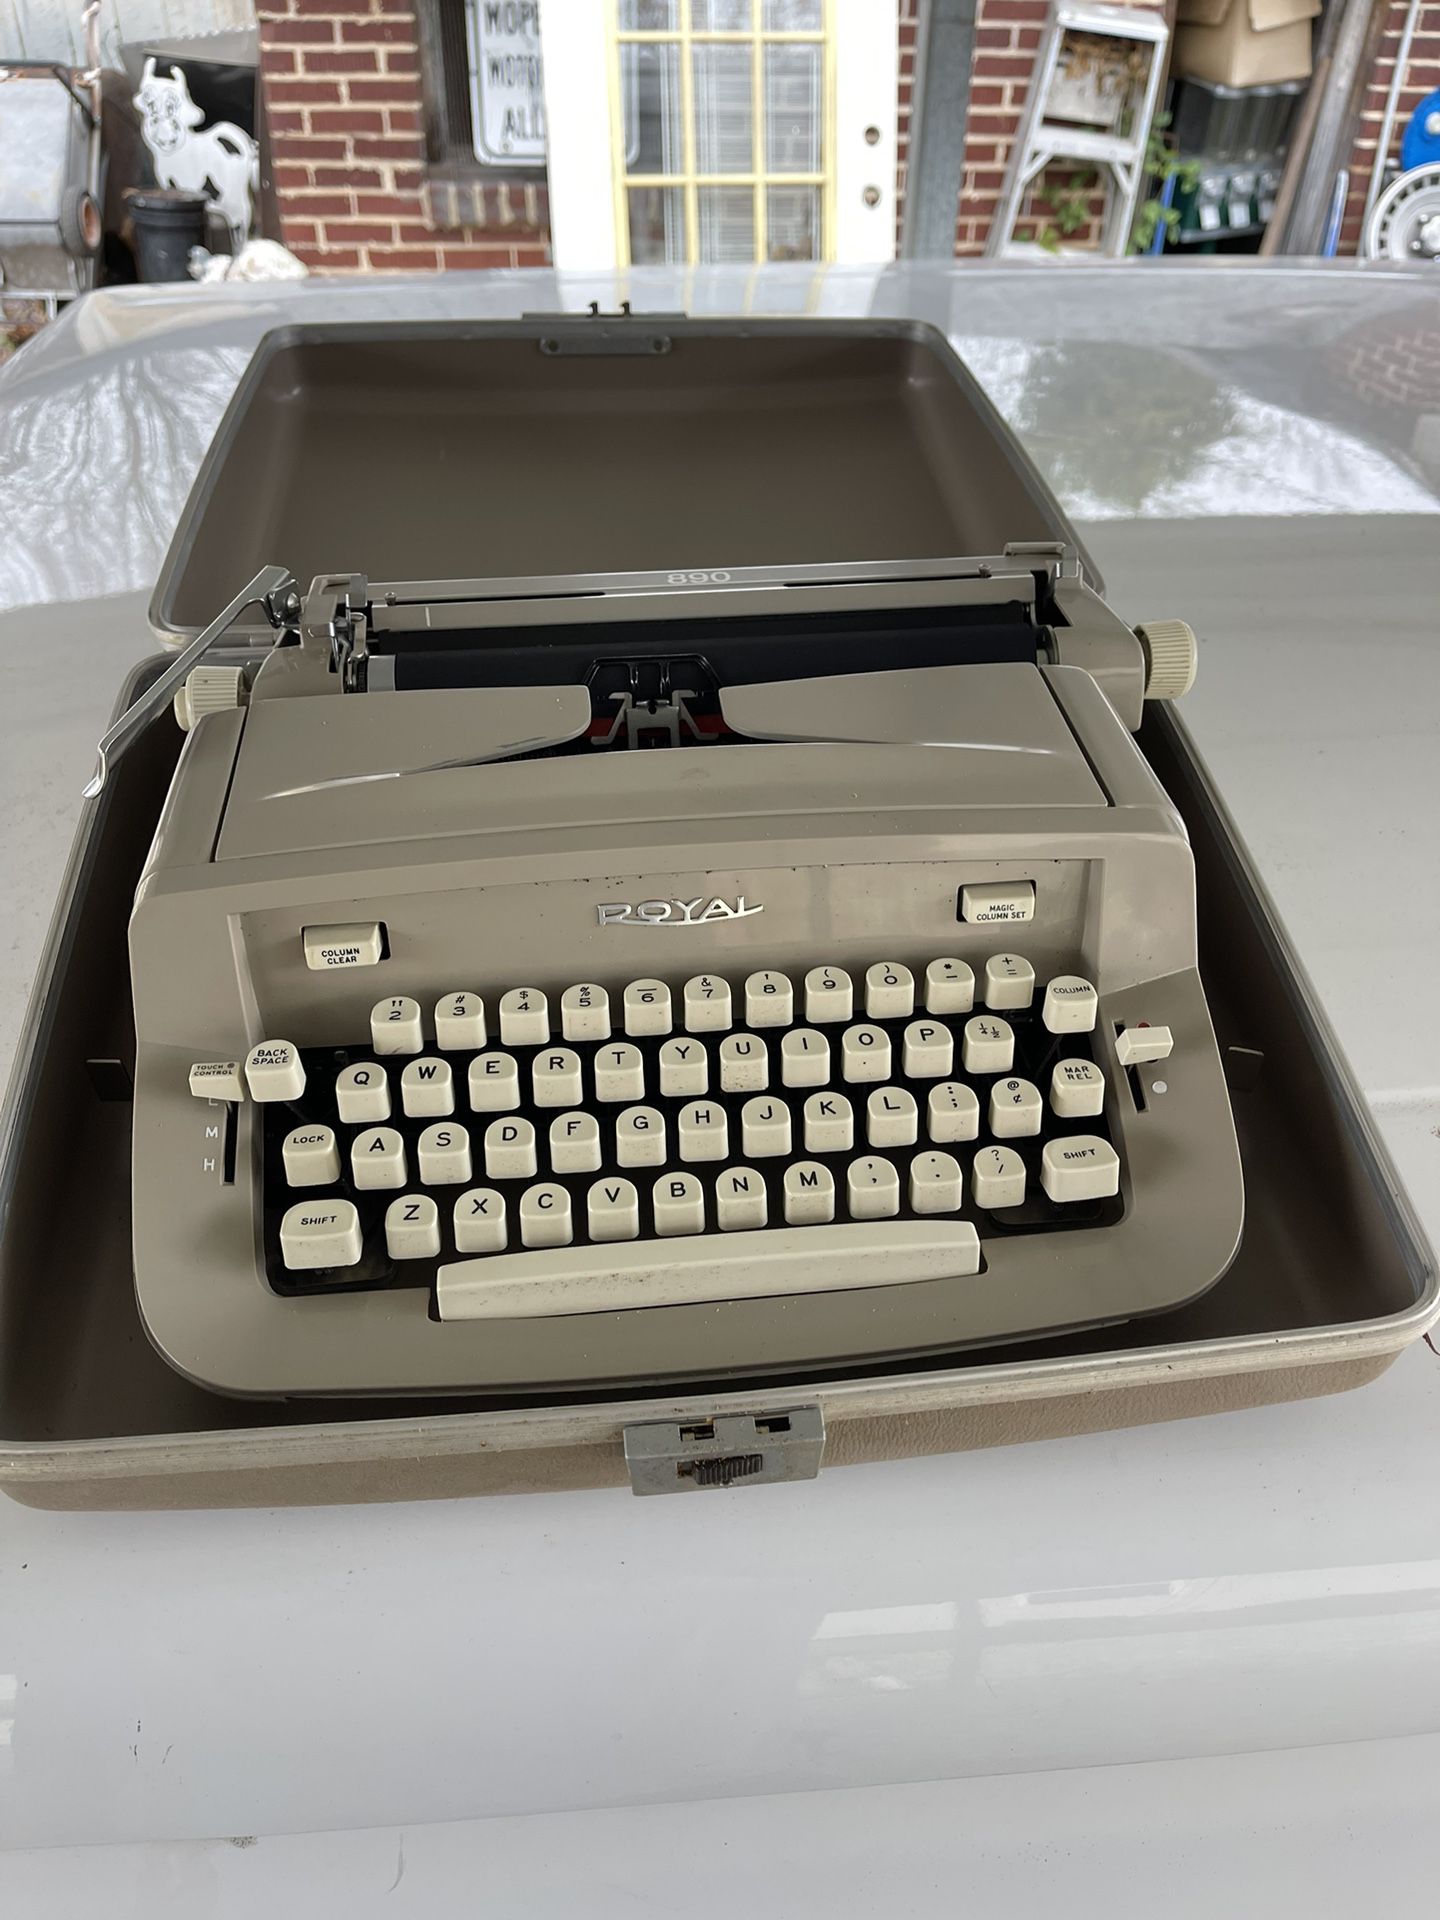 Older Type Writer 890 Royal It Still Looks Great And Still Works 